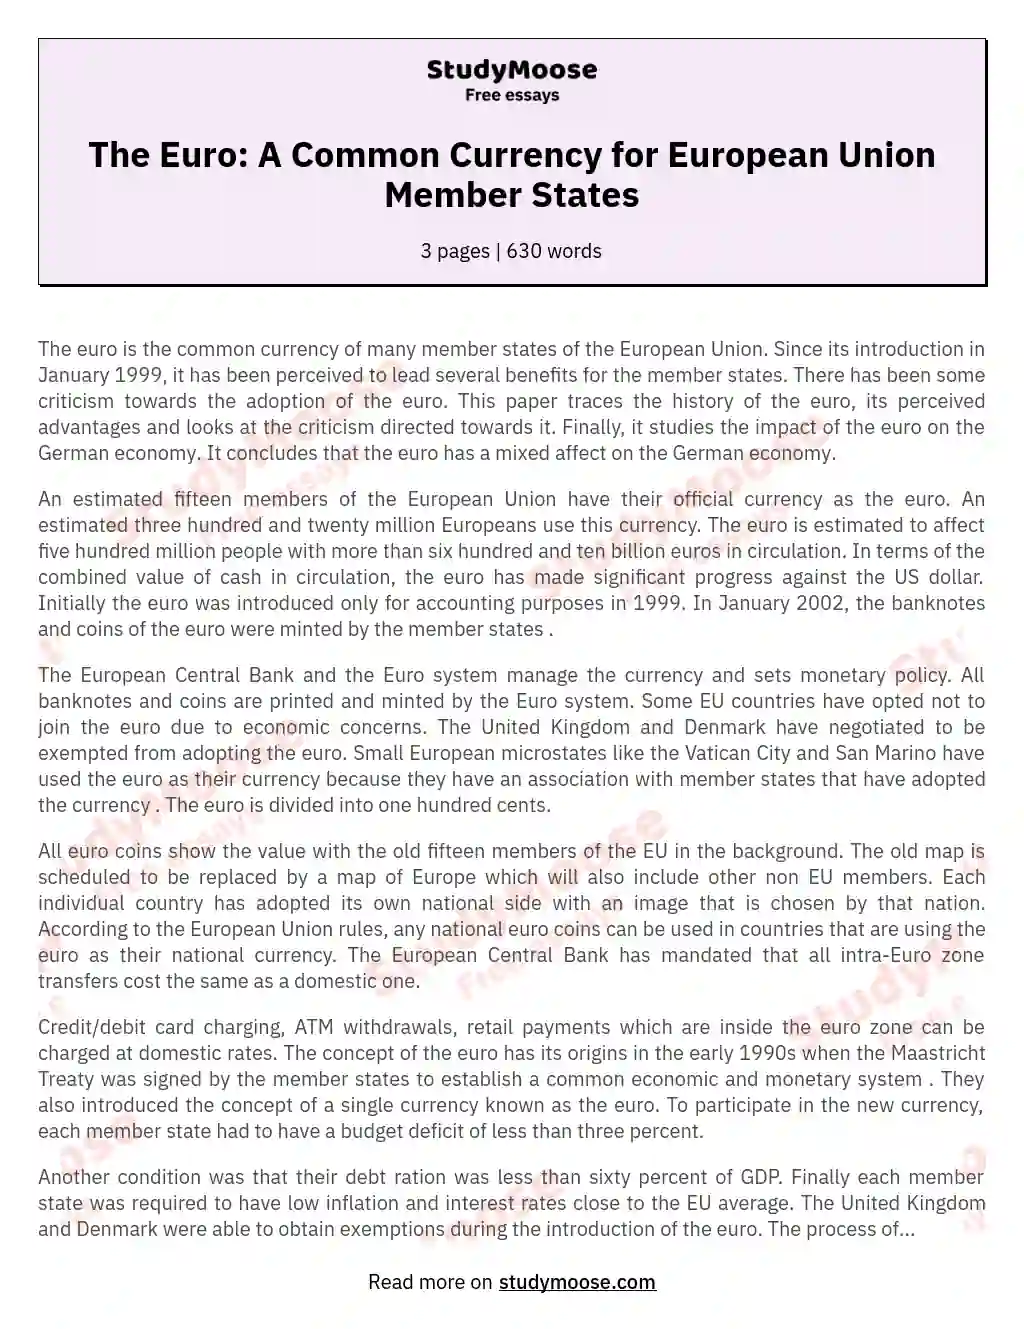 The Euro: A Common Currency for European Union Member States essay